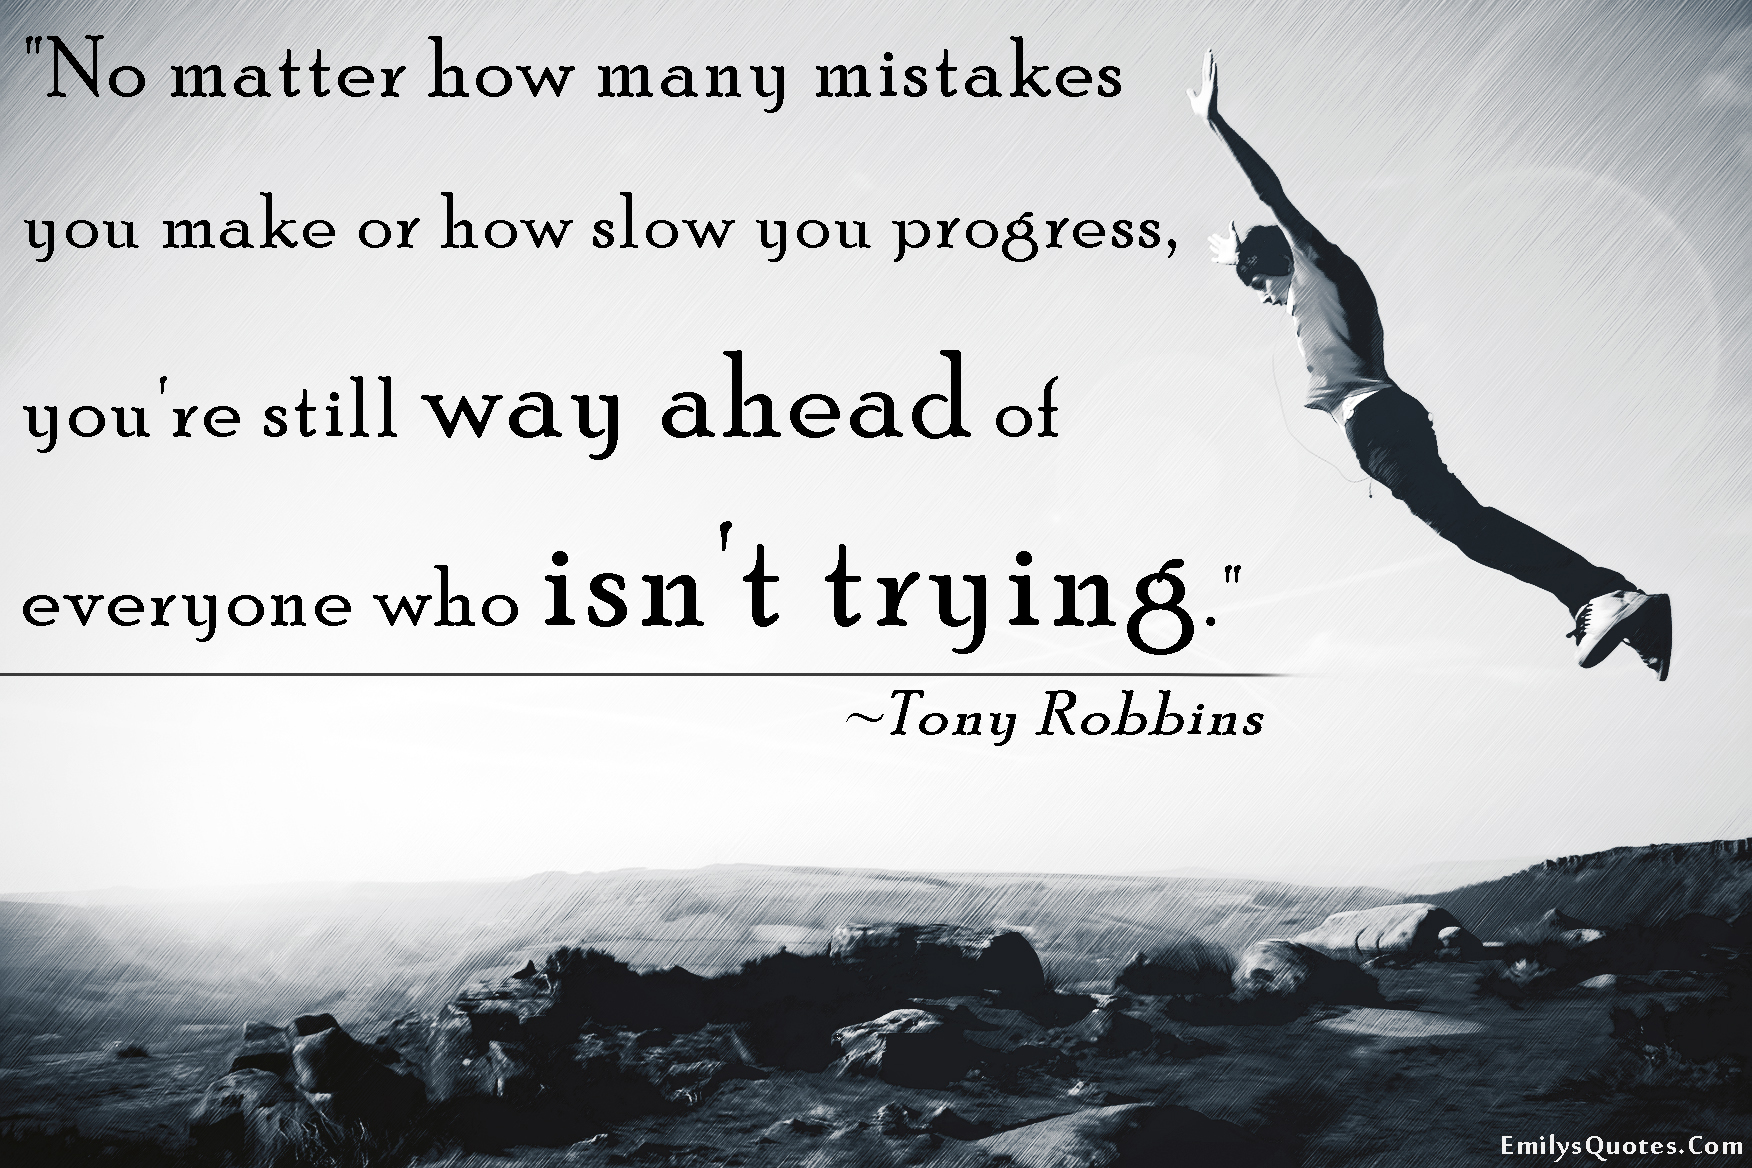 No matter how many mistakes you make or how slow you progress, you’re still way ahead of everyone who isn’t trying